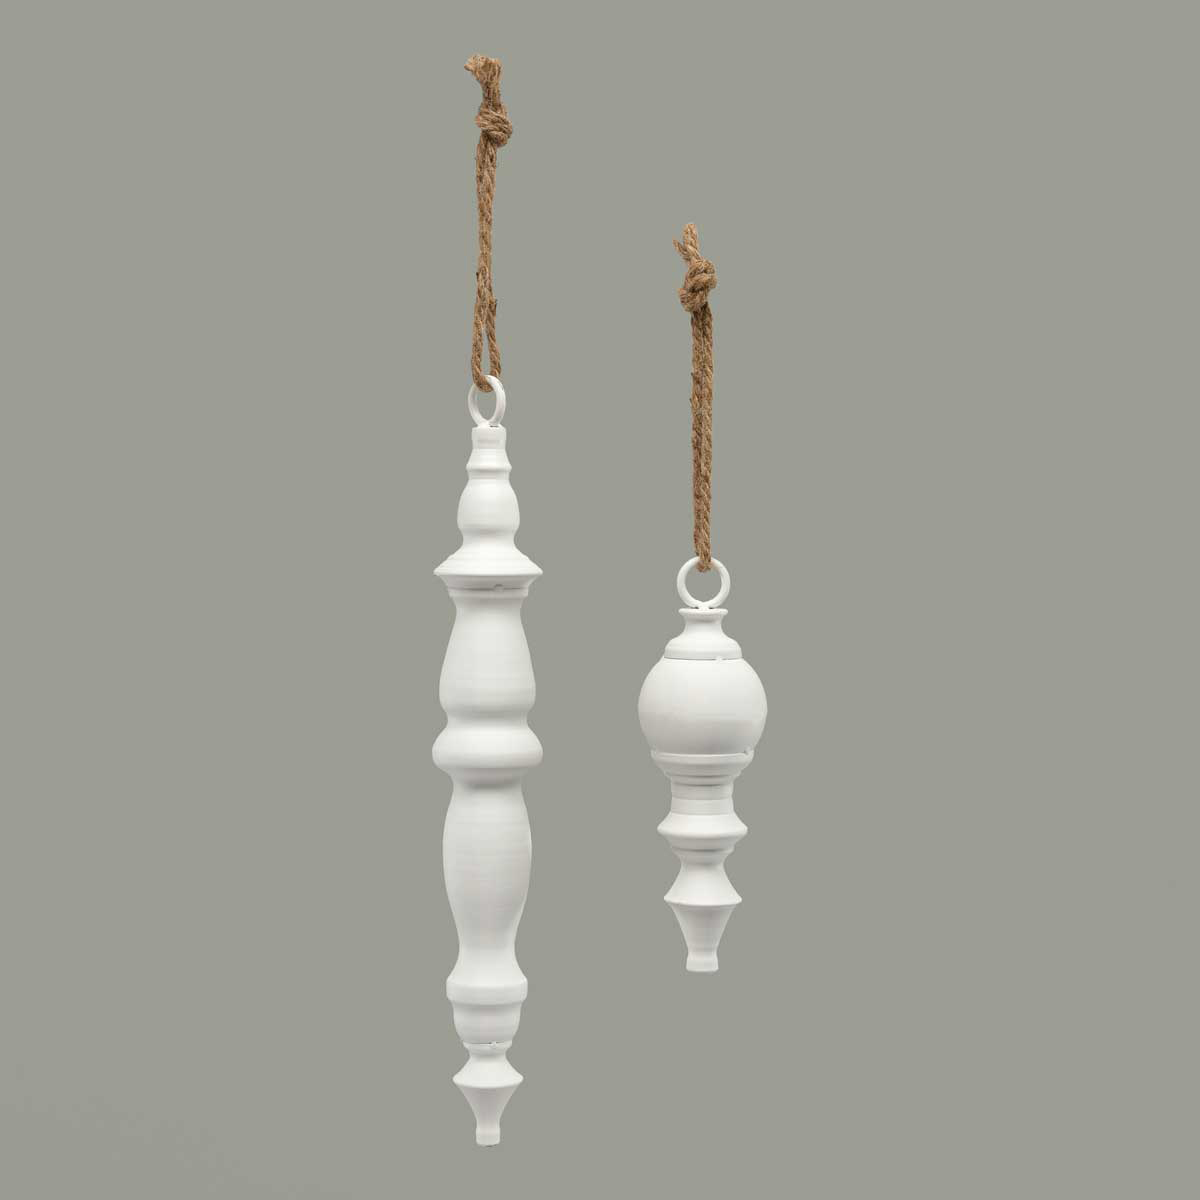 ORNAMENT FINIAL MATTE WHITE SMALL 2.75IN X 9IN METAL - Click Image to Close